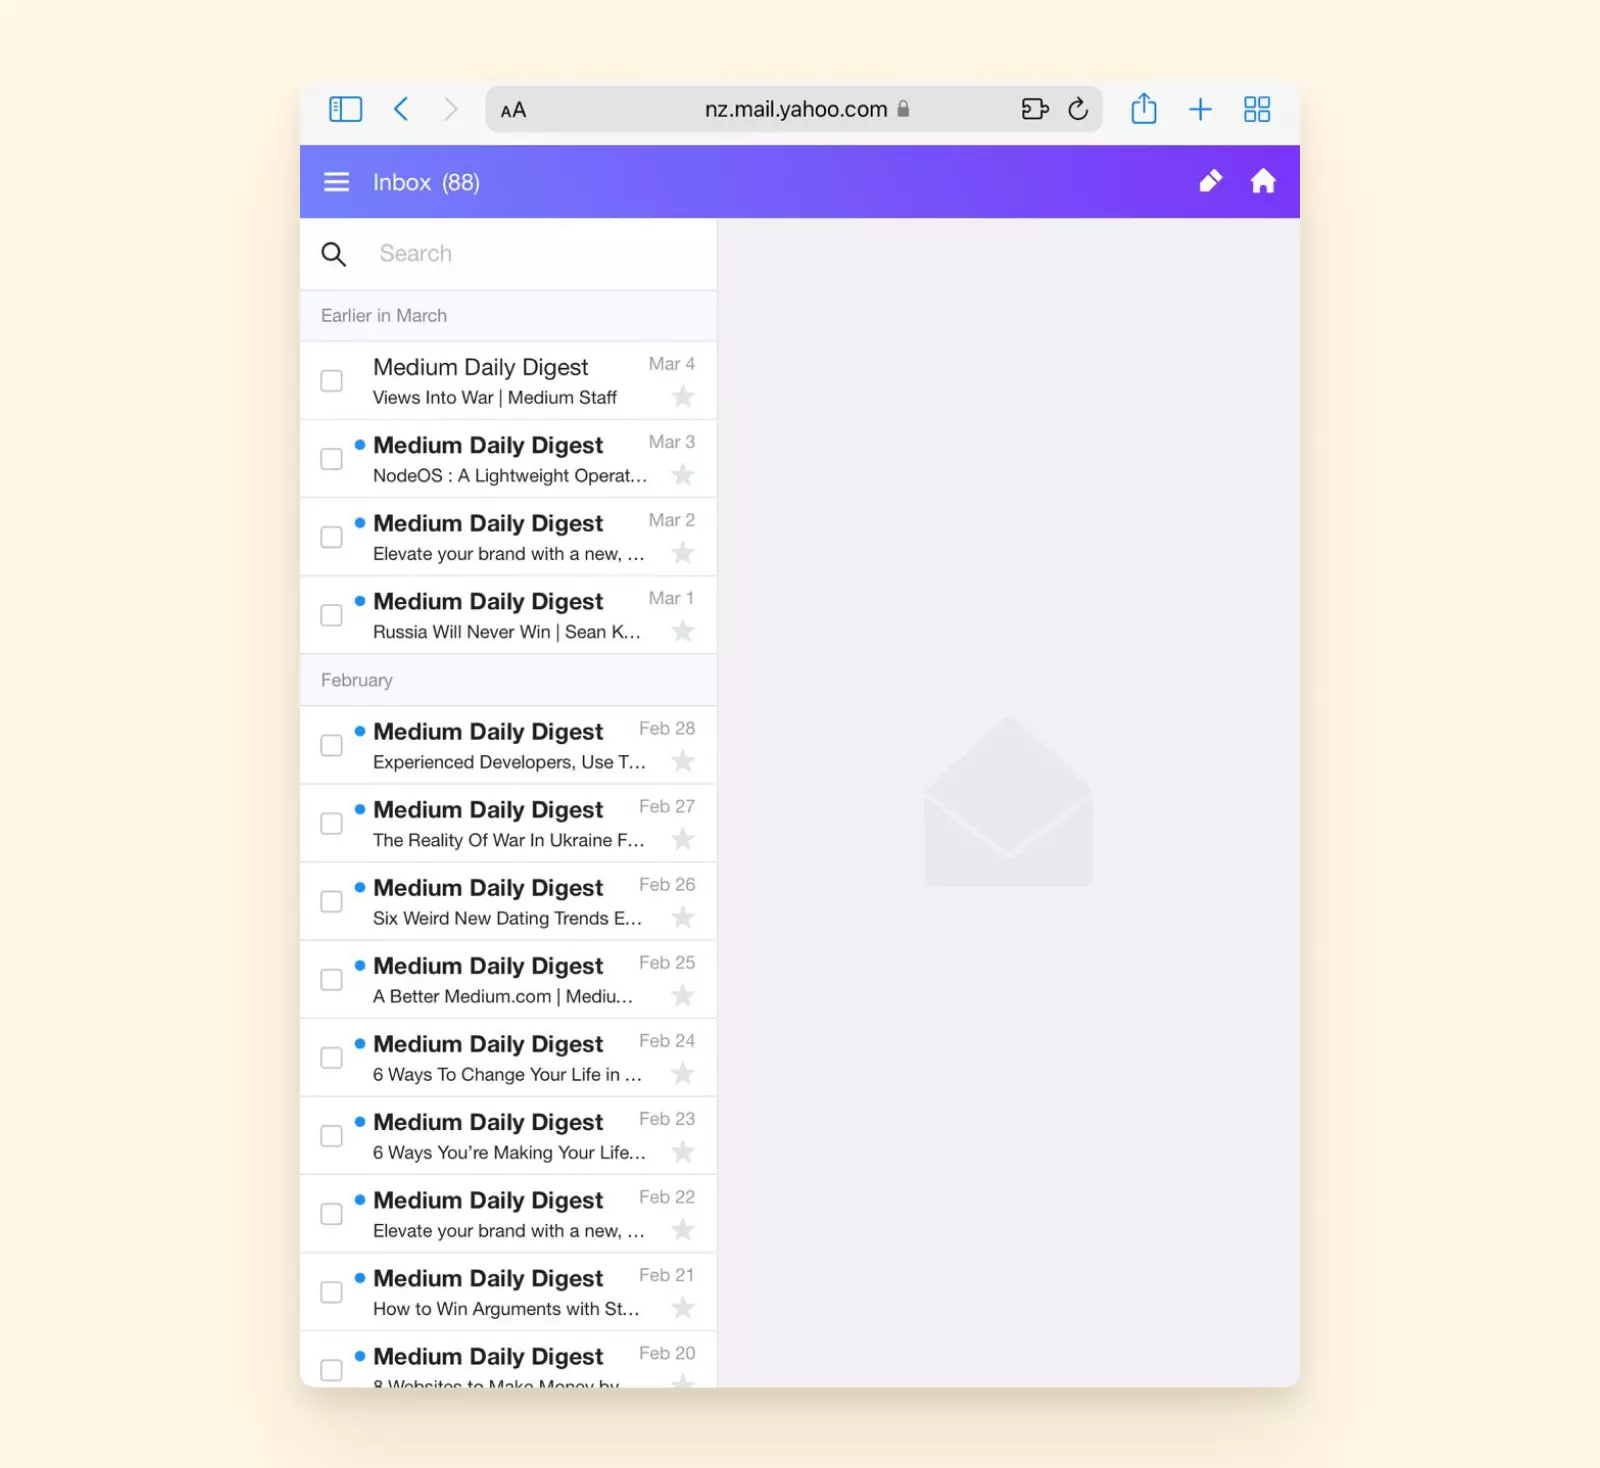 Yahoo Mail interface in an iPad browser